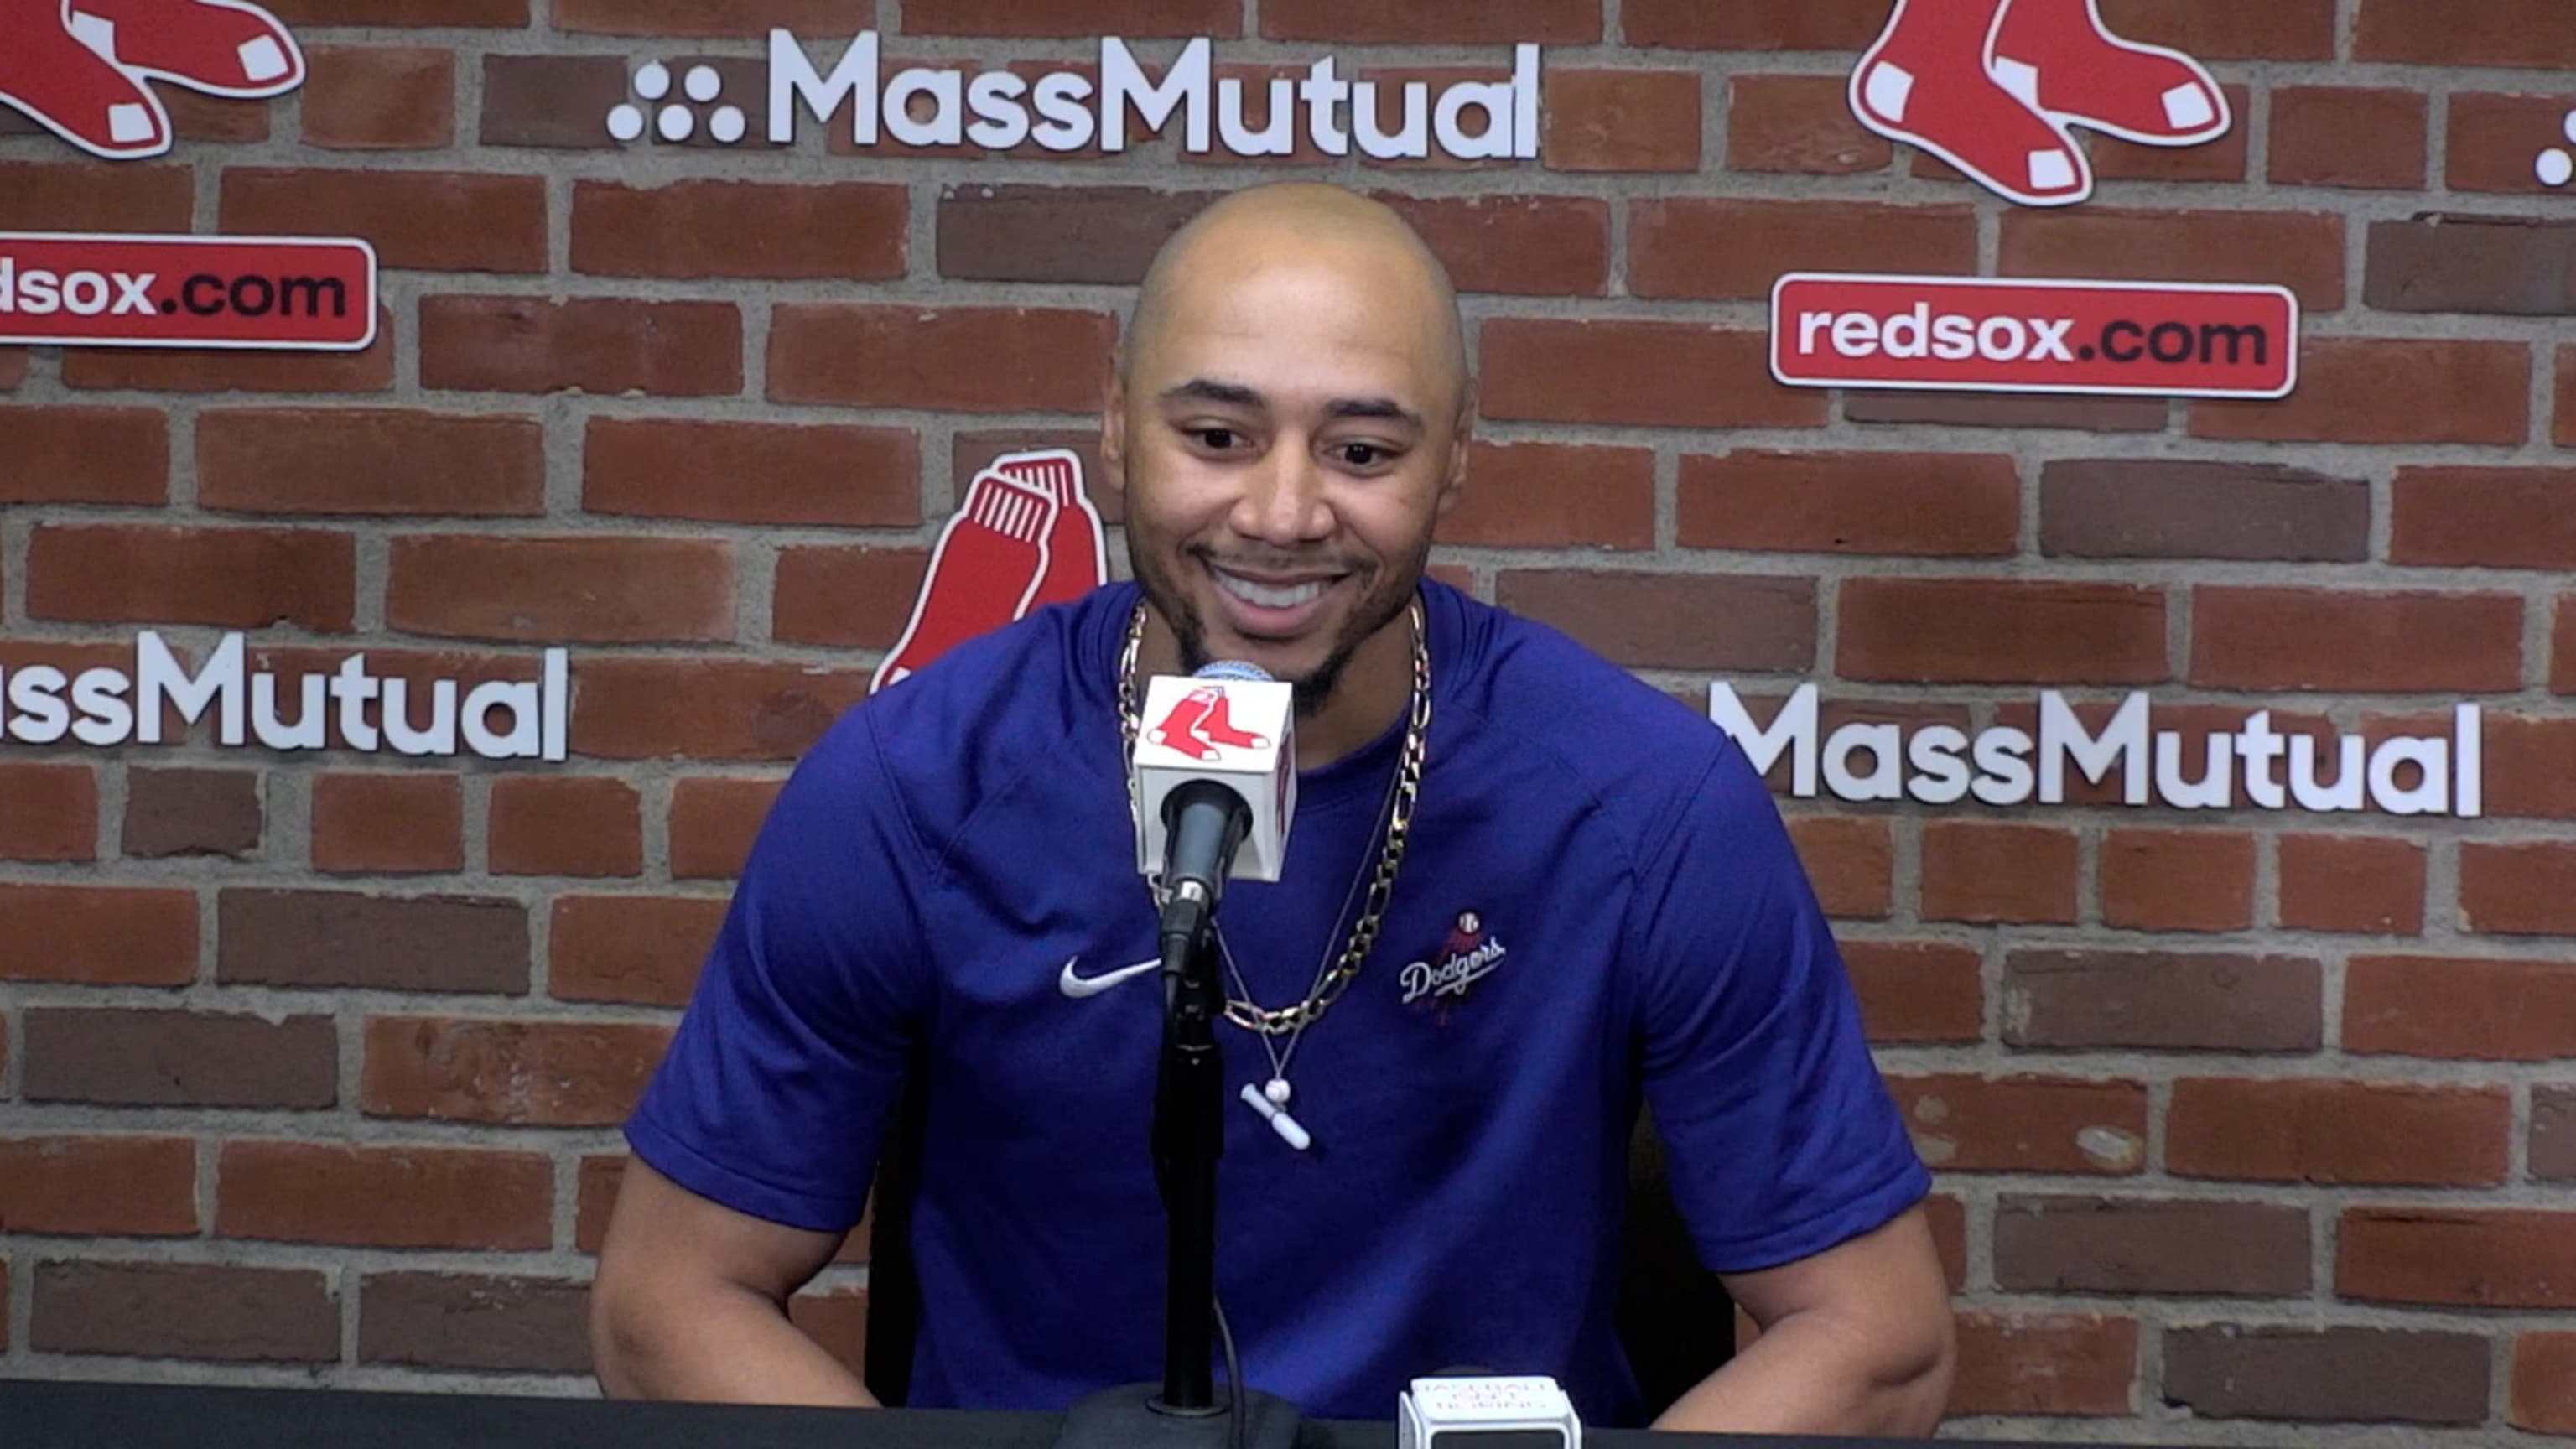 Red Sox fans' ovation for Mookie Betts will be about more than love – NBC  Sports Boston